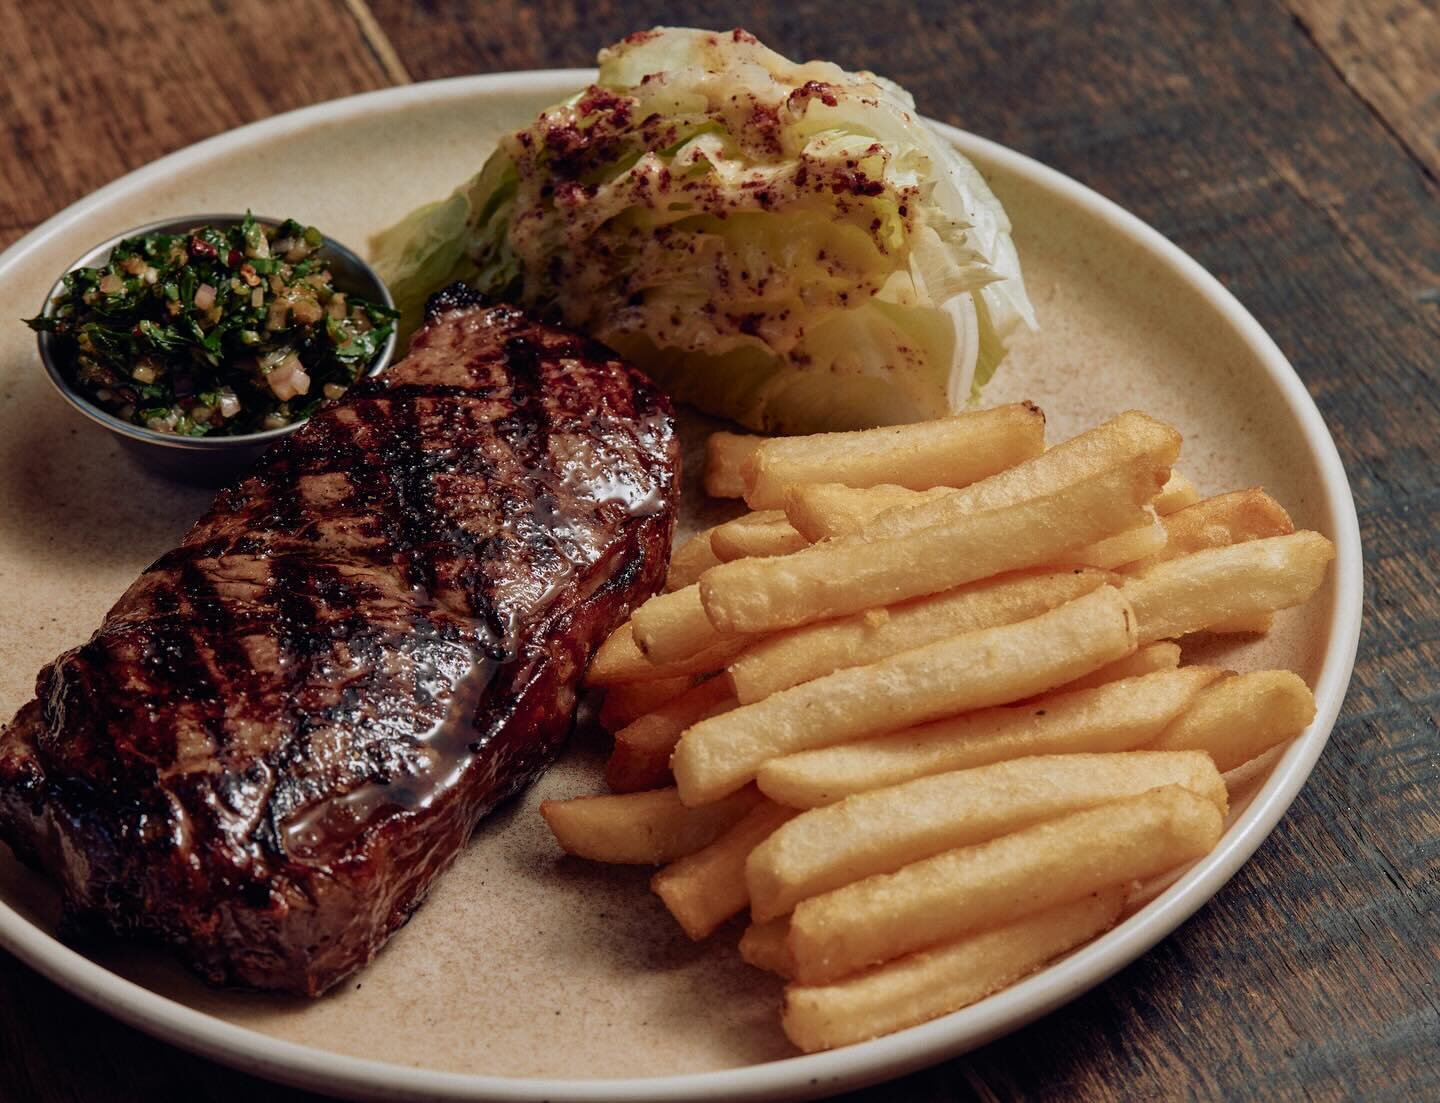 Our signature steak - 300g @capegrimbeef sirloin, from the lush pastures of Tasmania, with a choice of chimichurri or peppercorn sauce. 

*perfectly stacked chips not guaranteed 🍟👀

#thelincolncarlton #steaksaturday #openeasterlongweekend